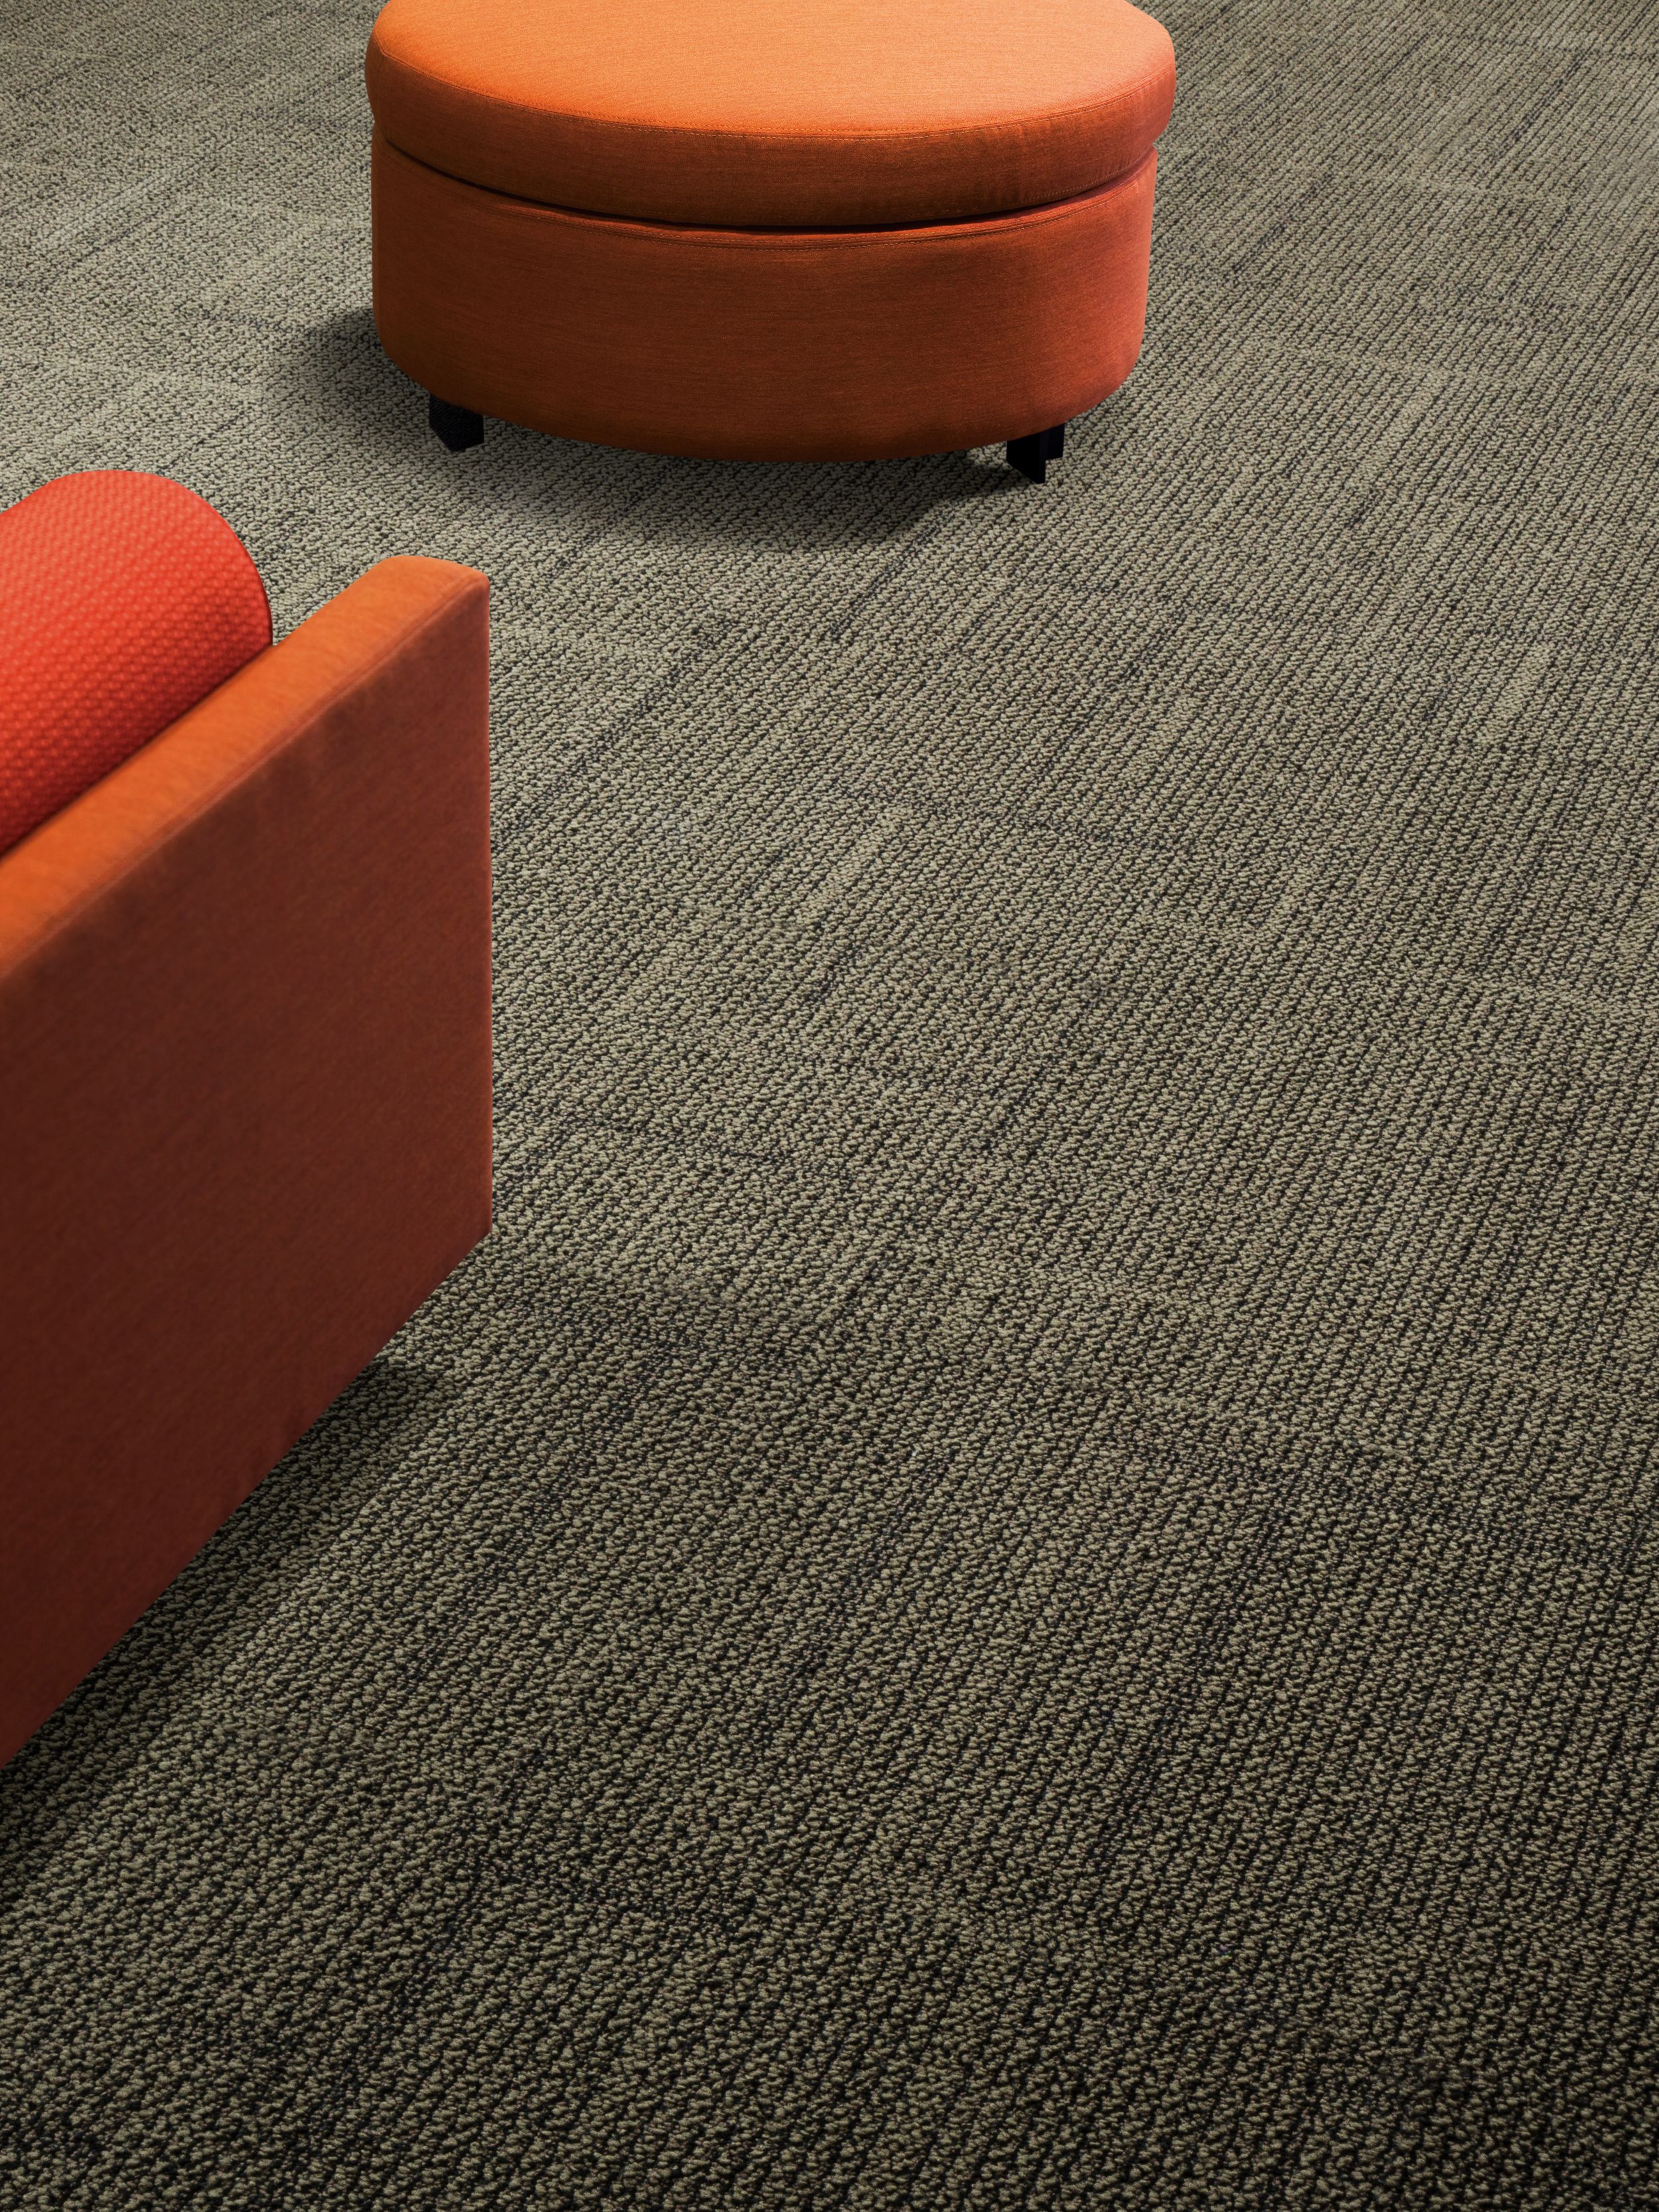 Interface Furrows II carpet tile detail with red chair imagen número 2